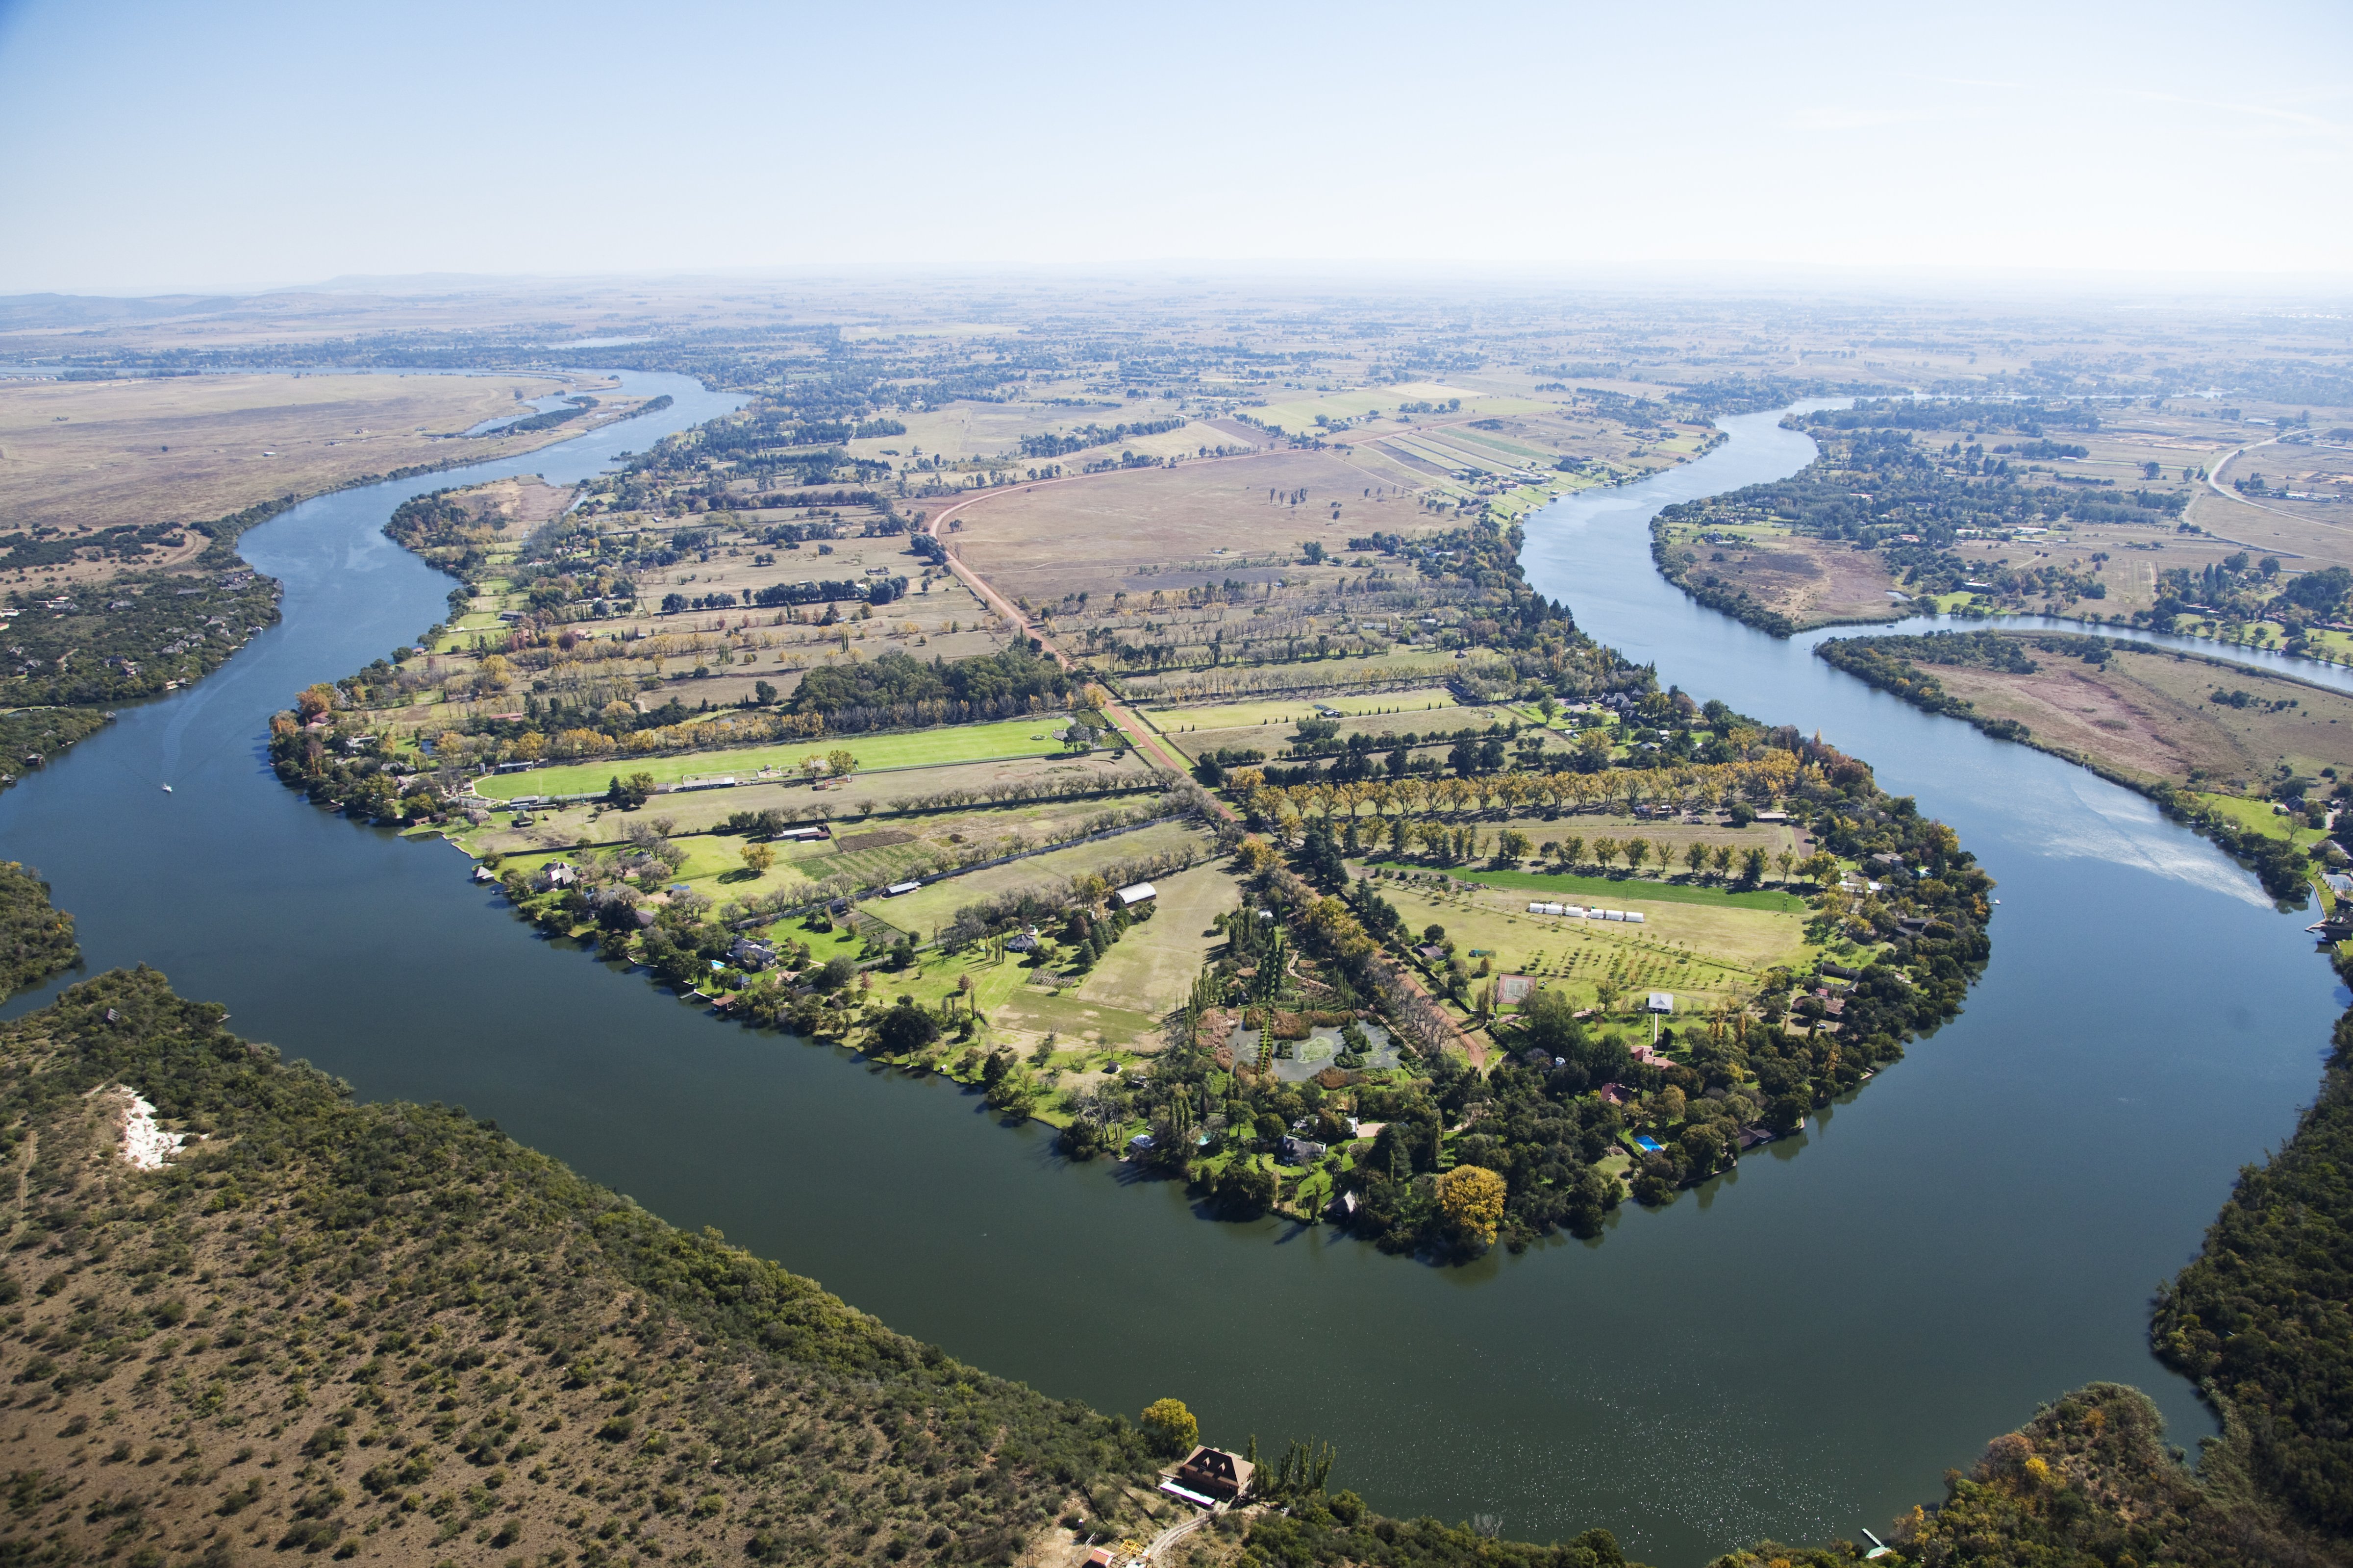 Vaal River, Aerial view, Gauteng Province, Free State Province, South Africa (Richard du Toit&mdash;Gallo Images/Getty Images)